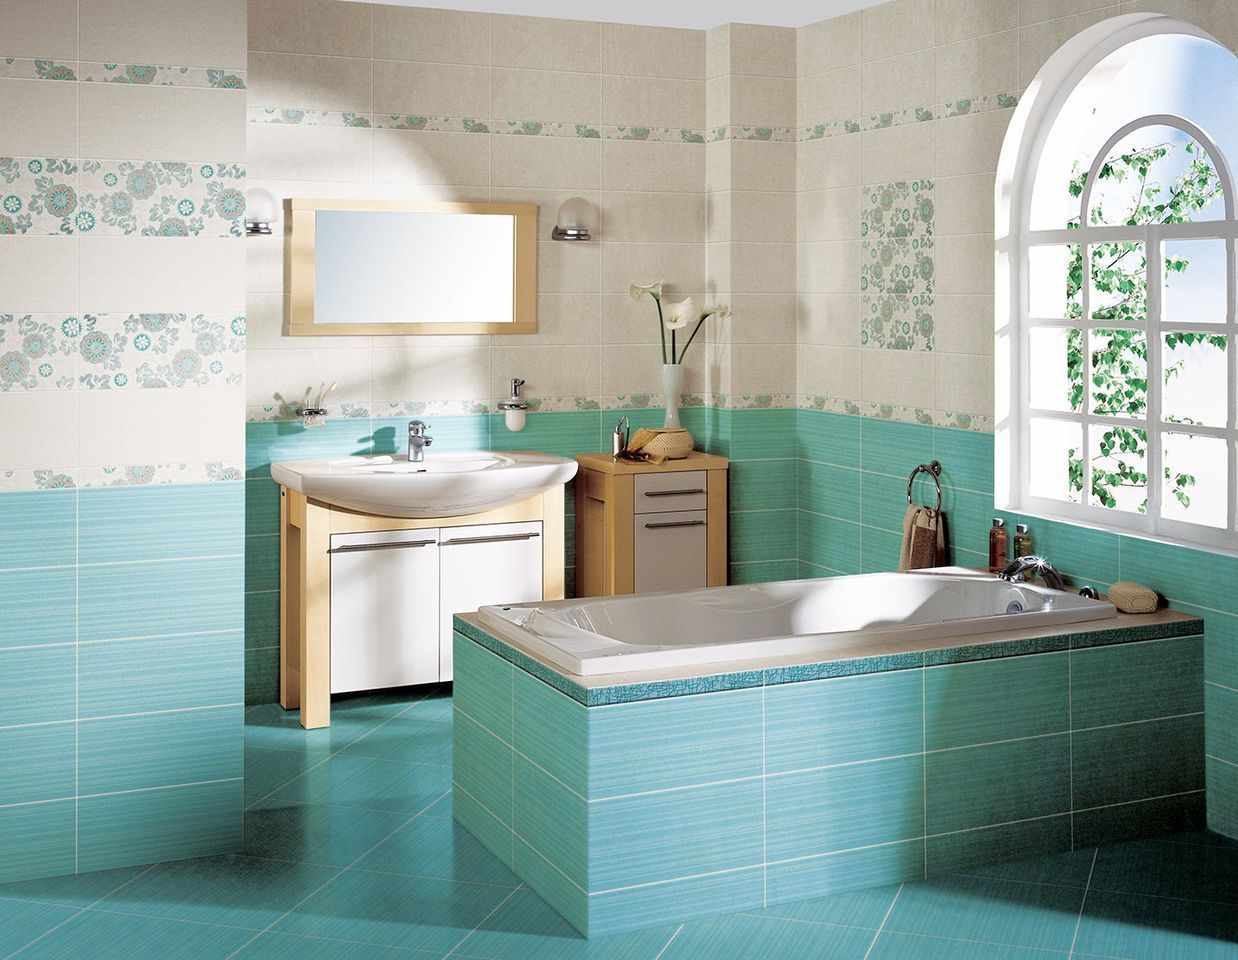 version of the beautiful bathroom decor with tiling